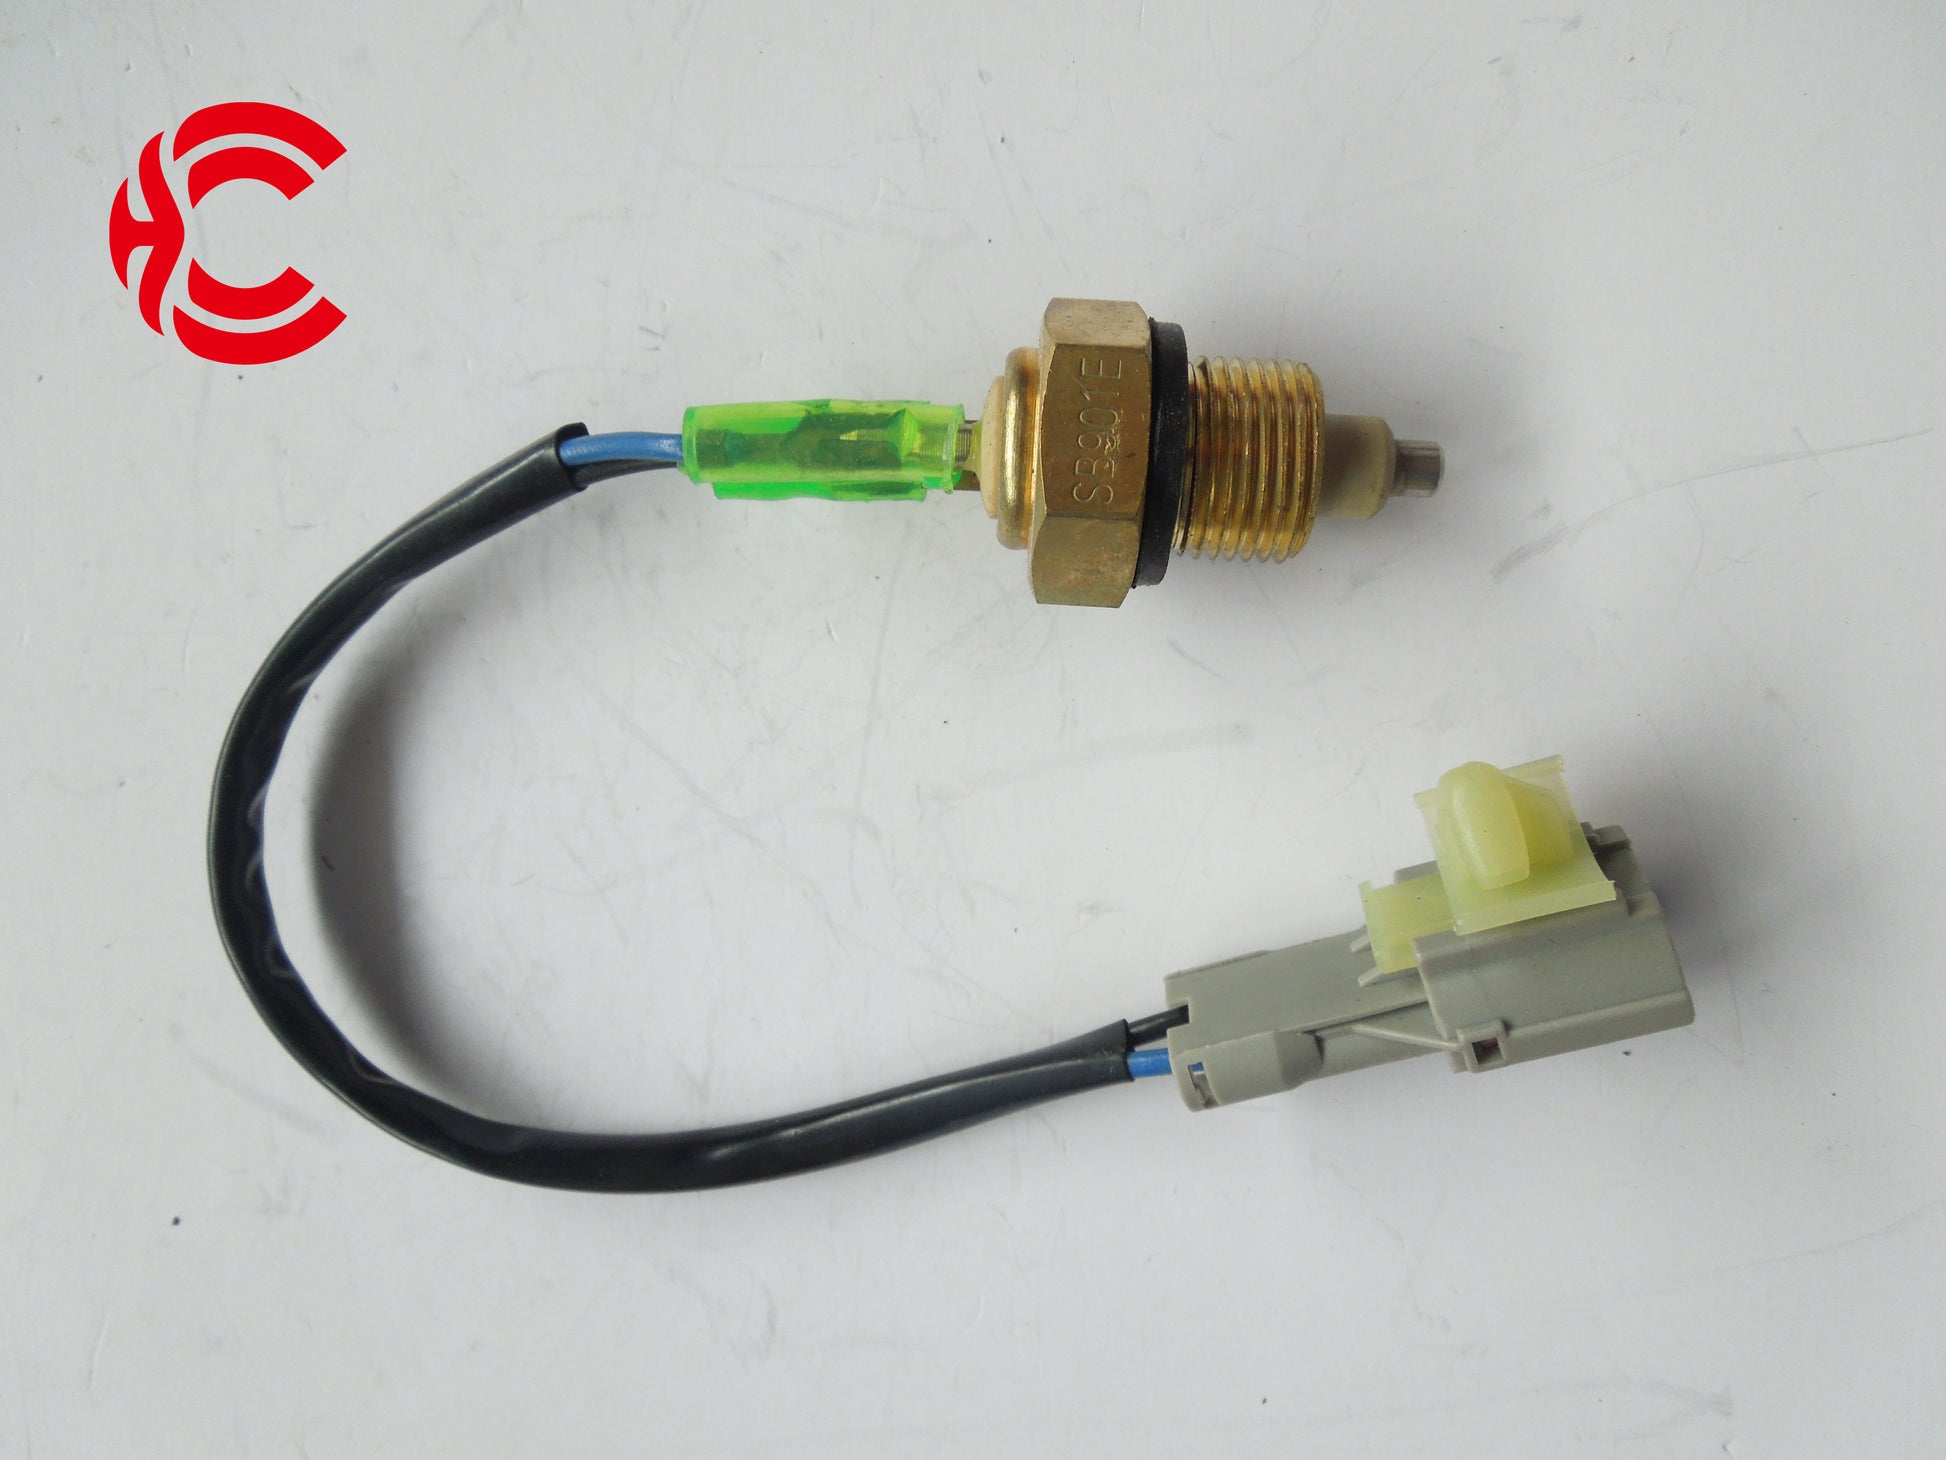 OEM: 36AD-10020 SB901E HUALINGMaterial: ABS metalColor: Black GoldenOrigin: Made in ChinaWeight: 50gPacking List: 1* Coolant Level Alarm Sensor More ServiceWe can provide OEM Manufacturing serviceWe can Be your one-step solution for Auto PartsWe can provide technical scheme for you Feel Free to Contact Us, we will get back to you as soon as possible.